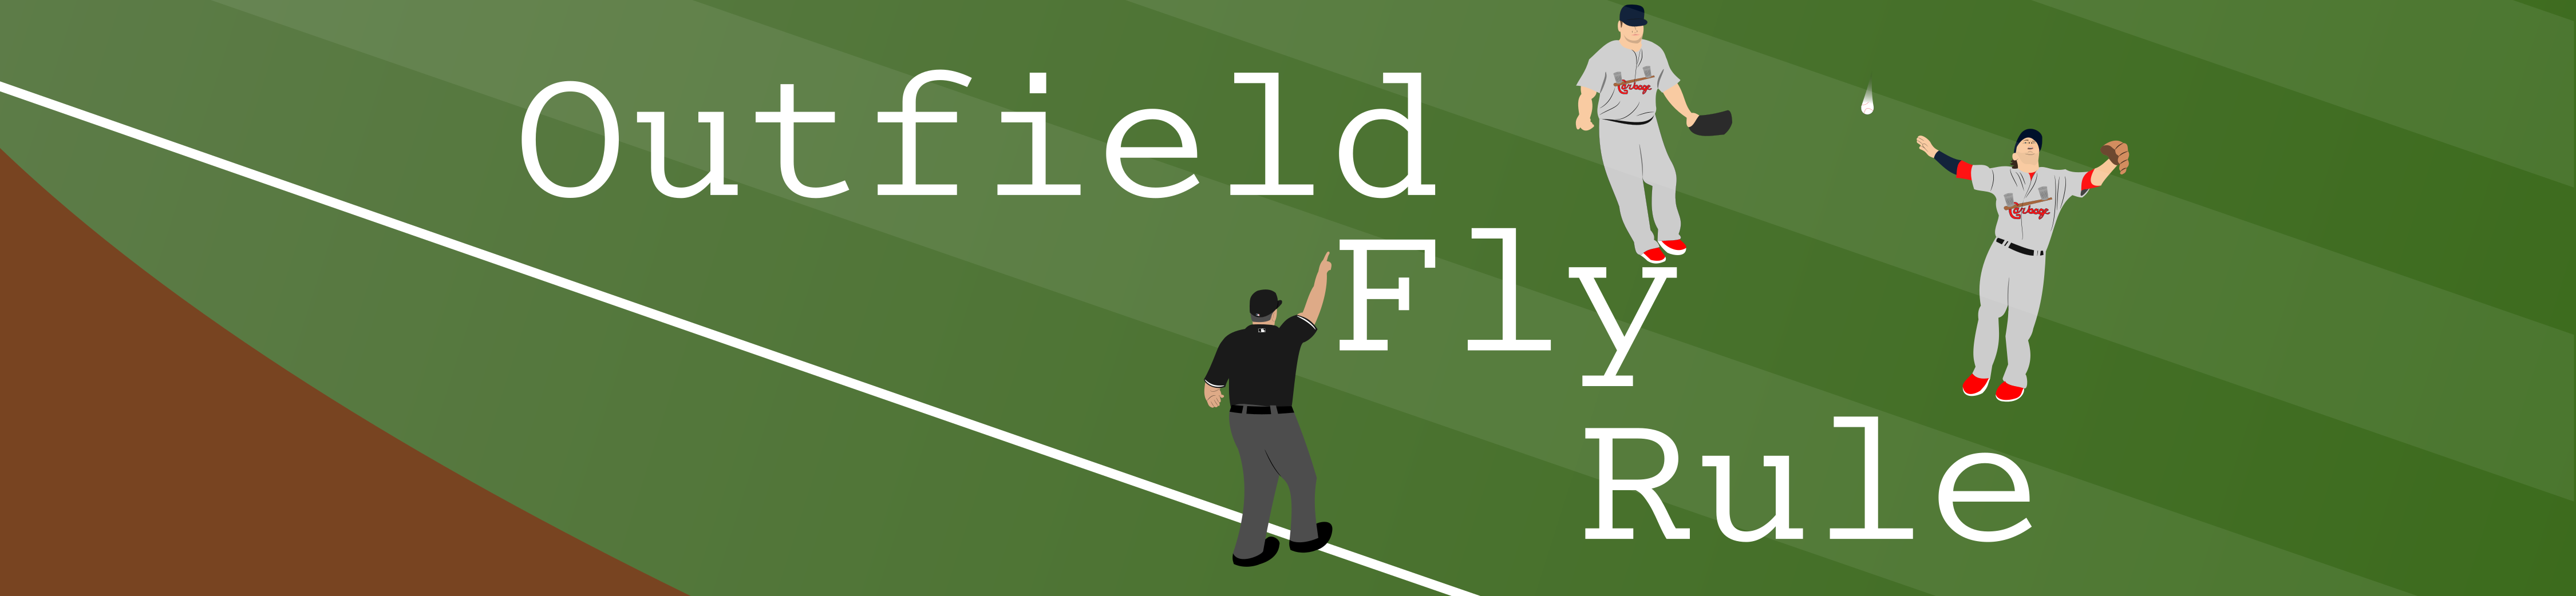 Outfield Fly Rule